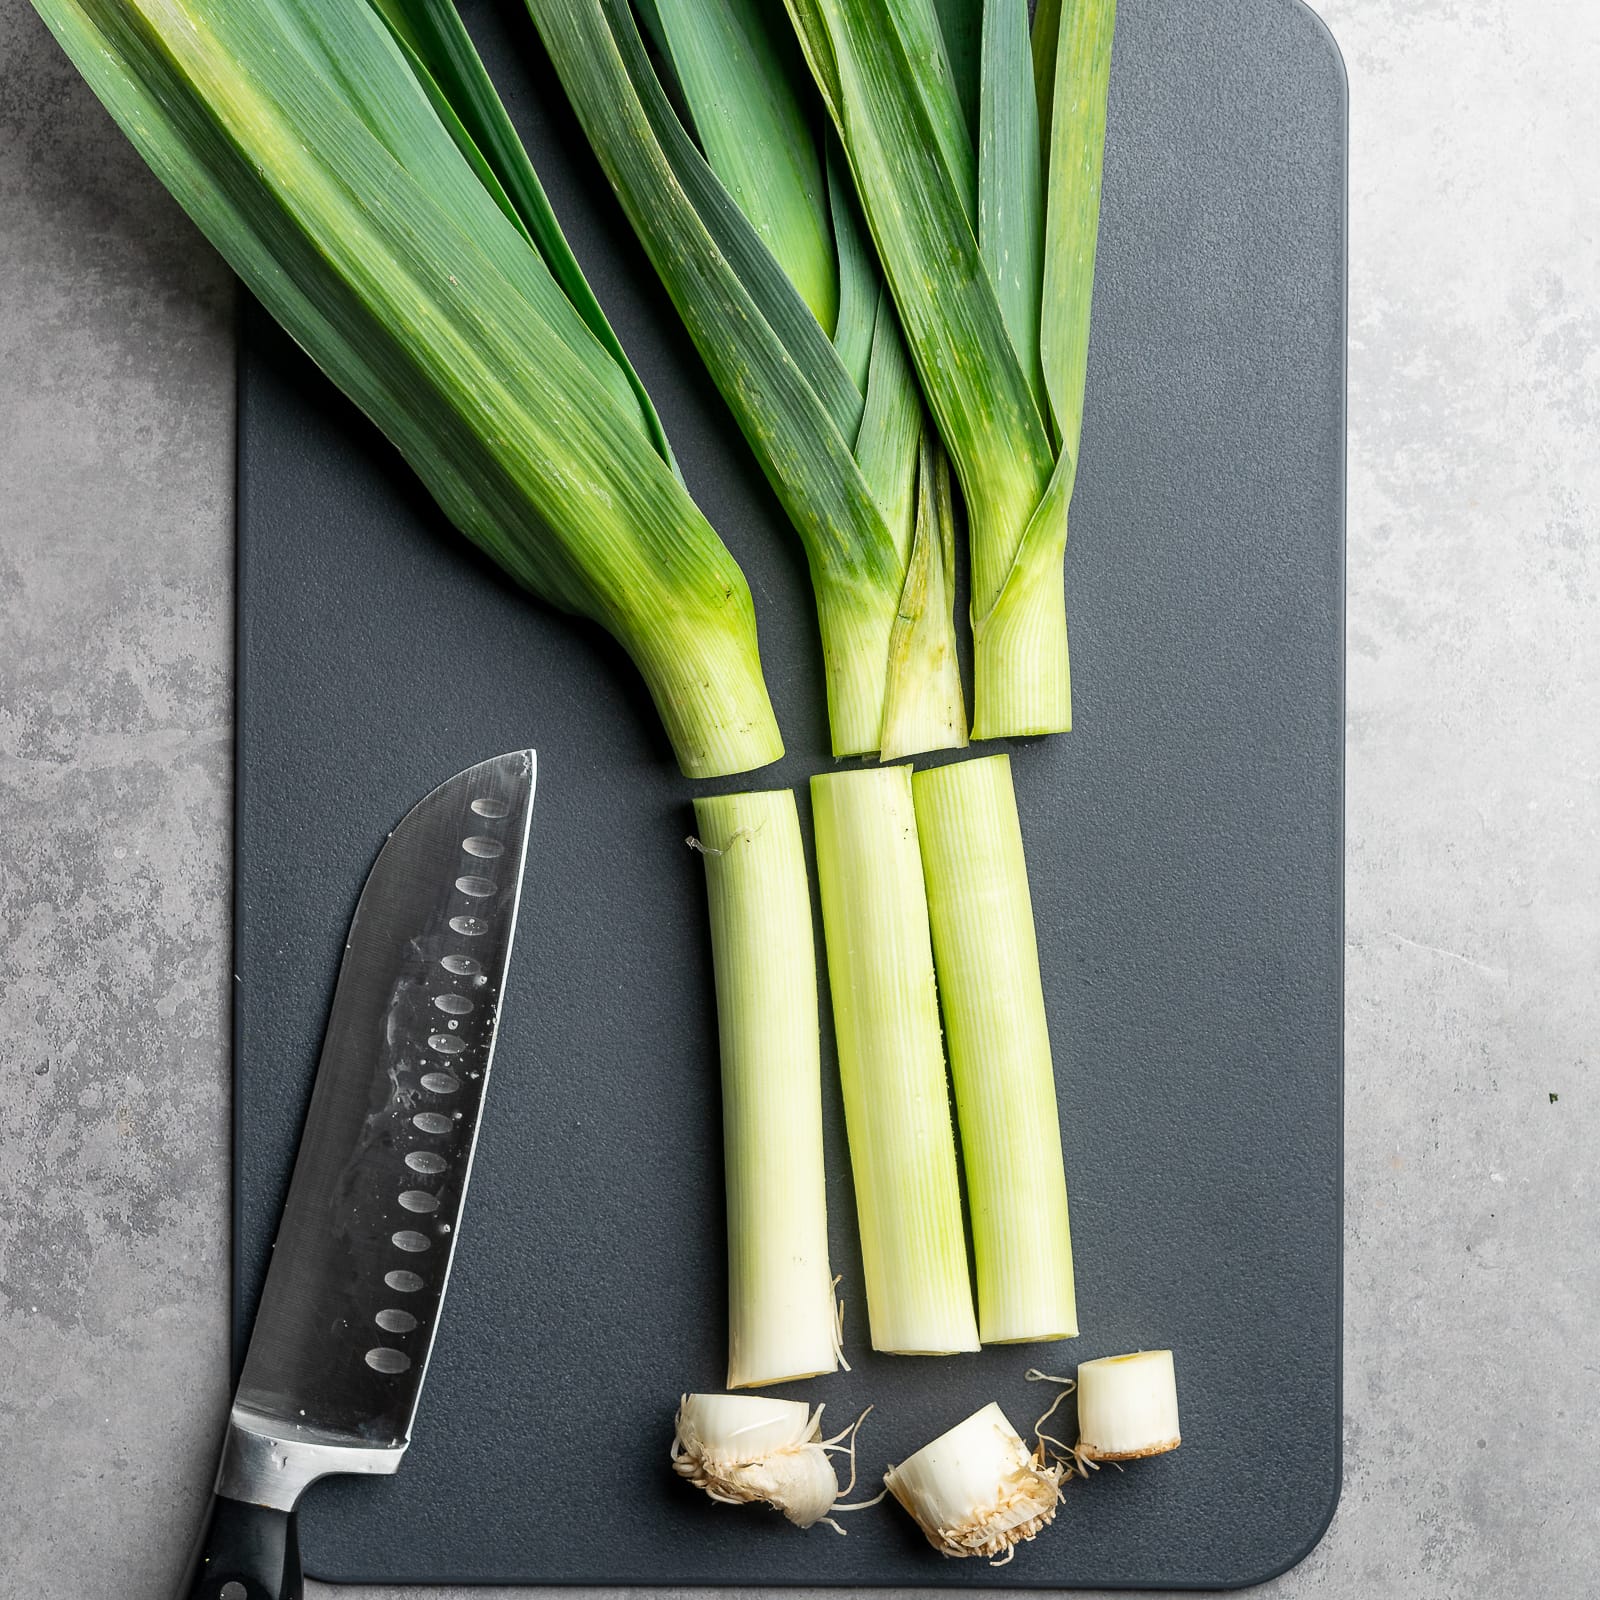 Slice the bottoms off and the tops off the leeks.